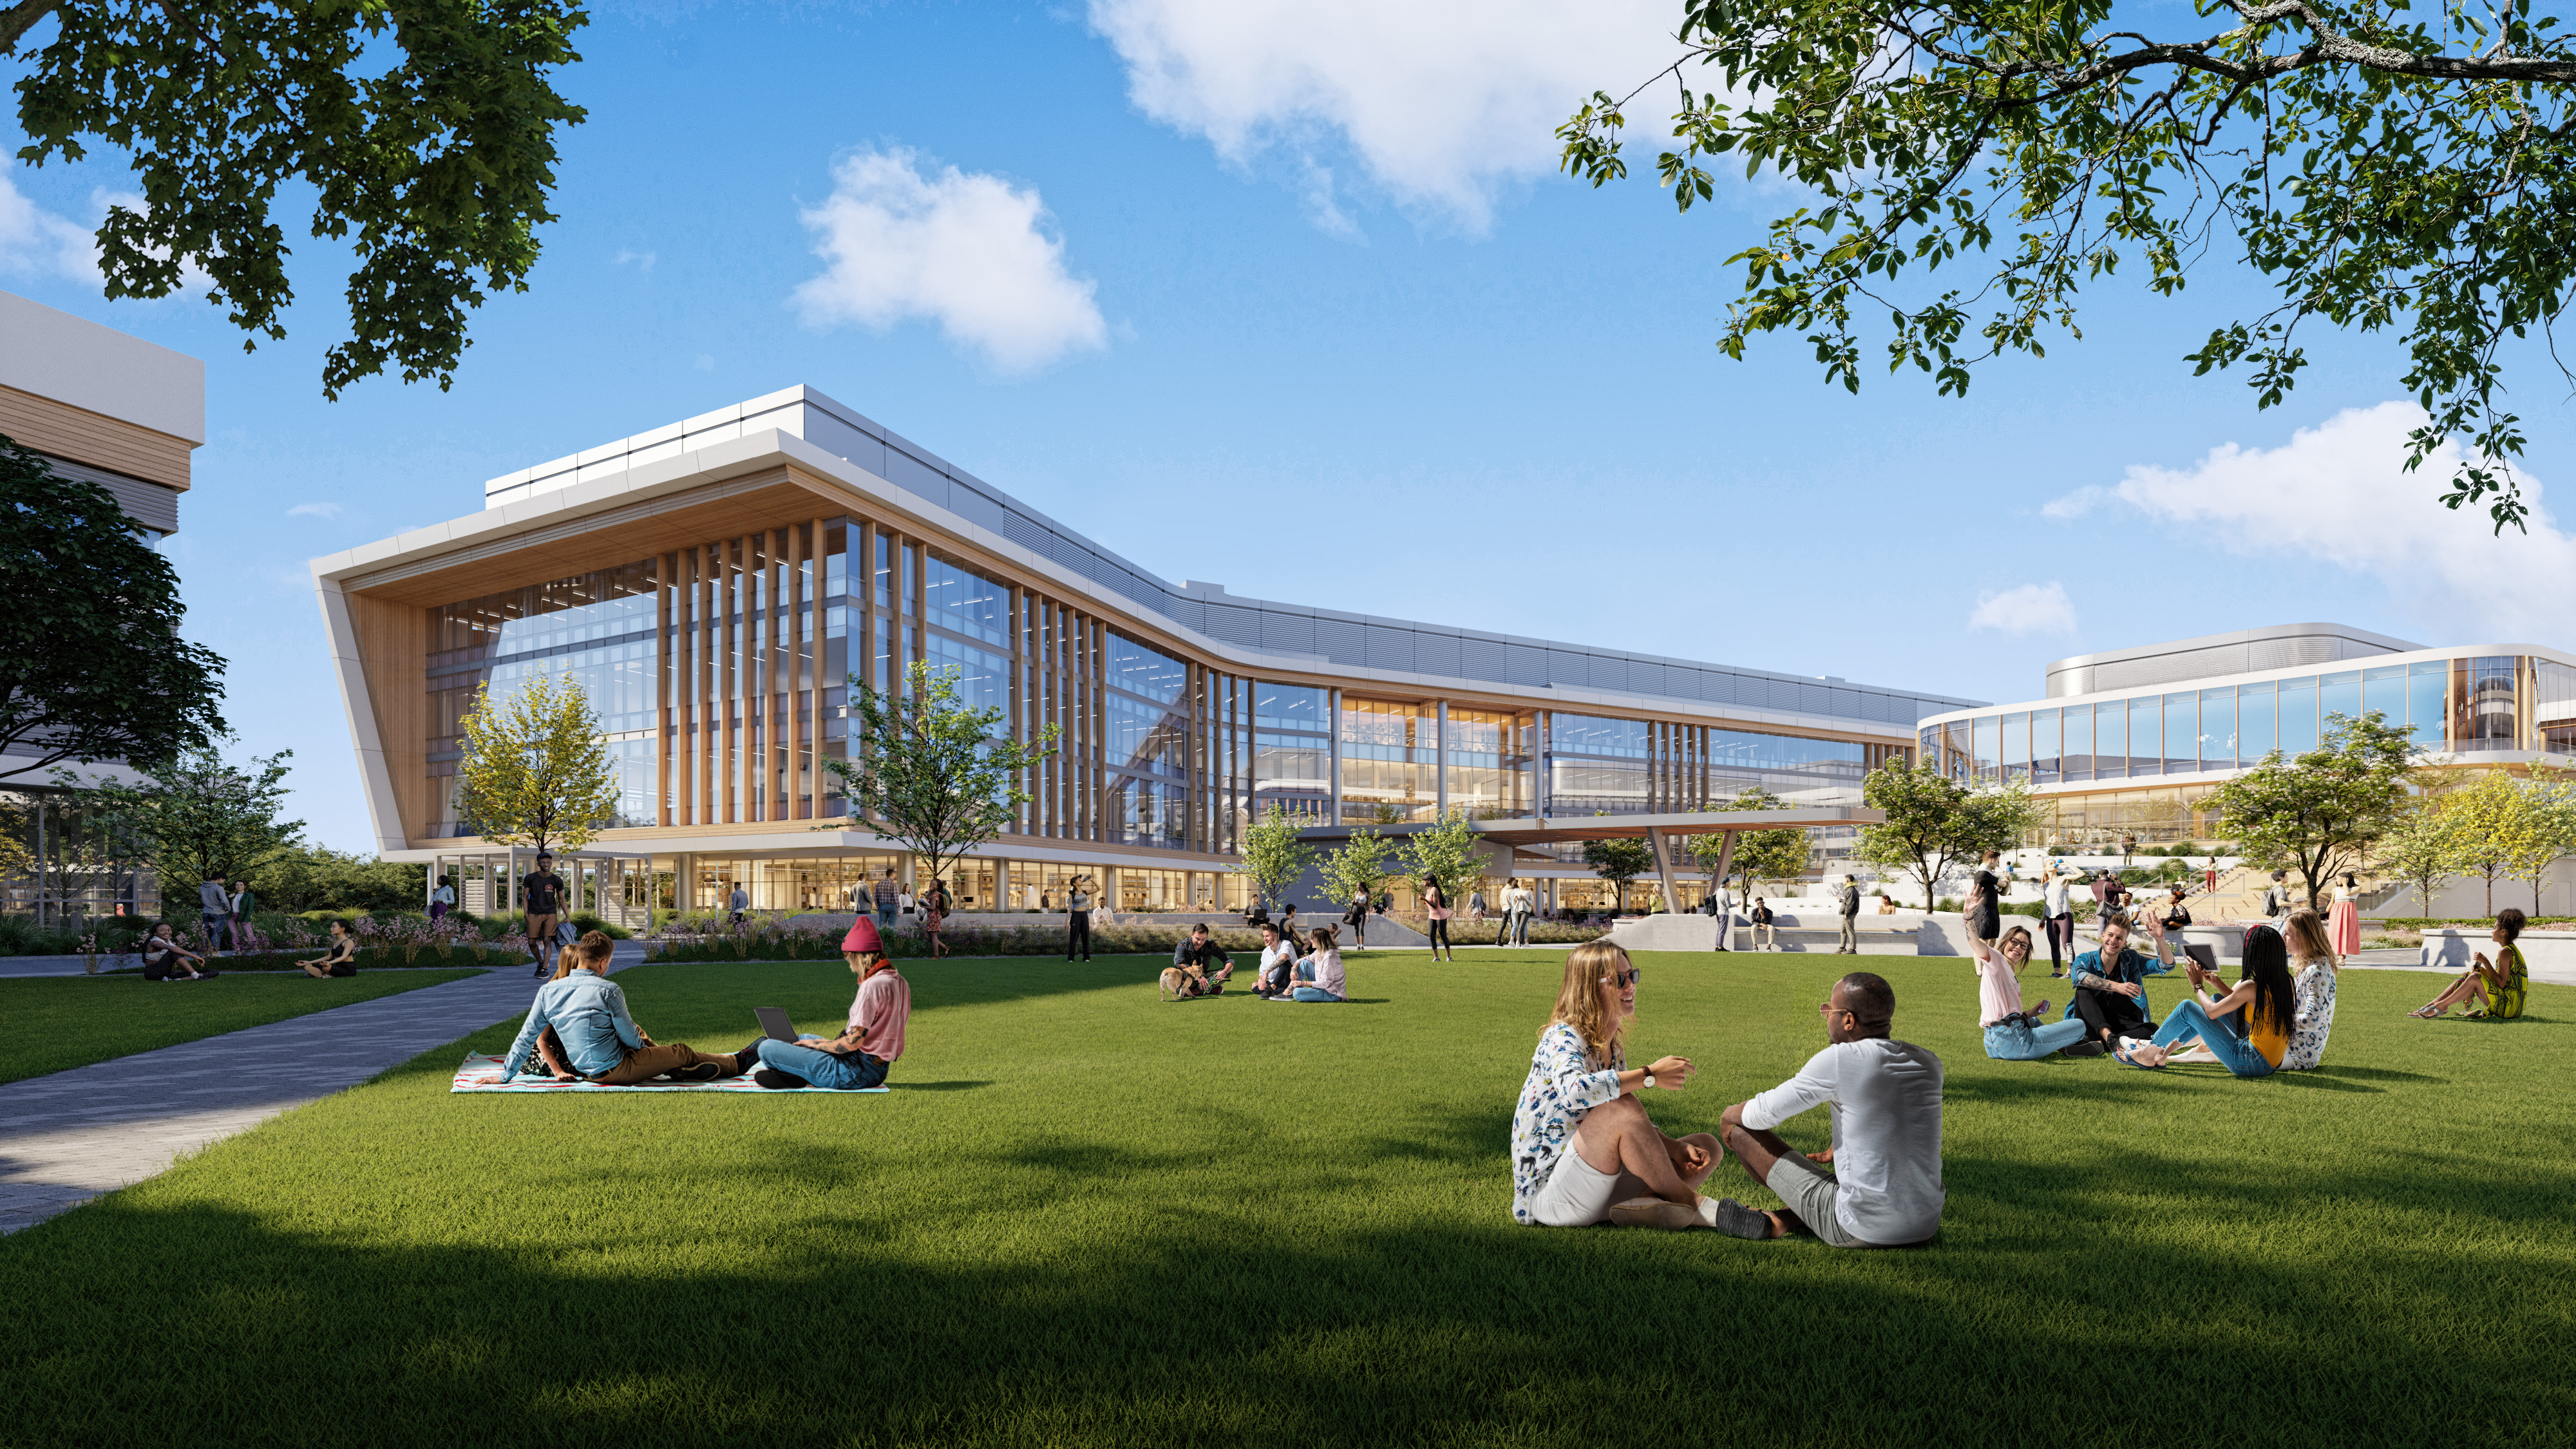 Top 80 Science + Technology Facility Construction Firms for 2023, rendering courtesy Skanska